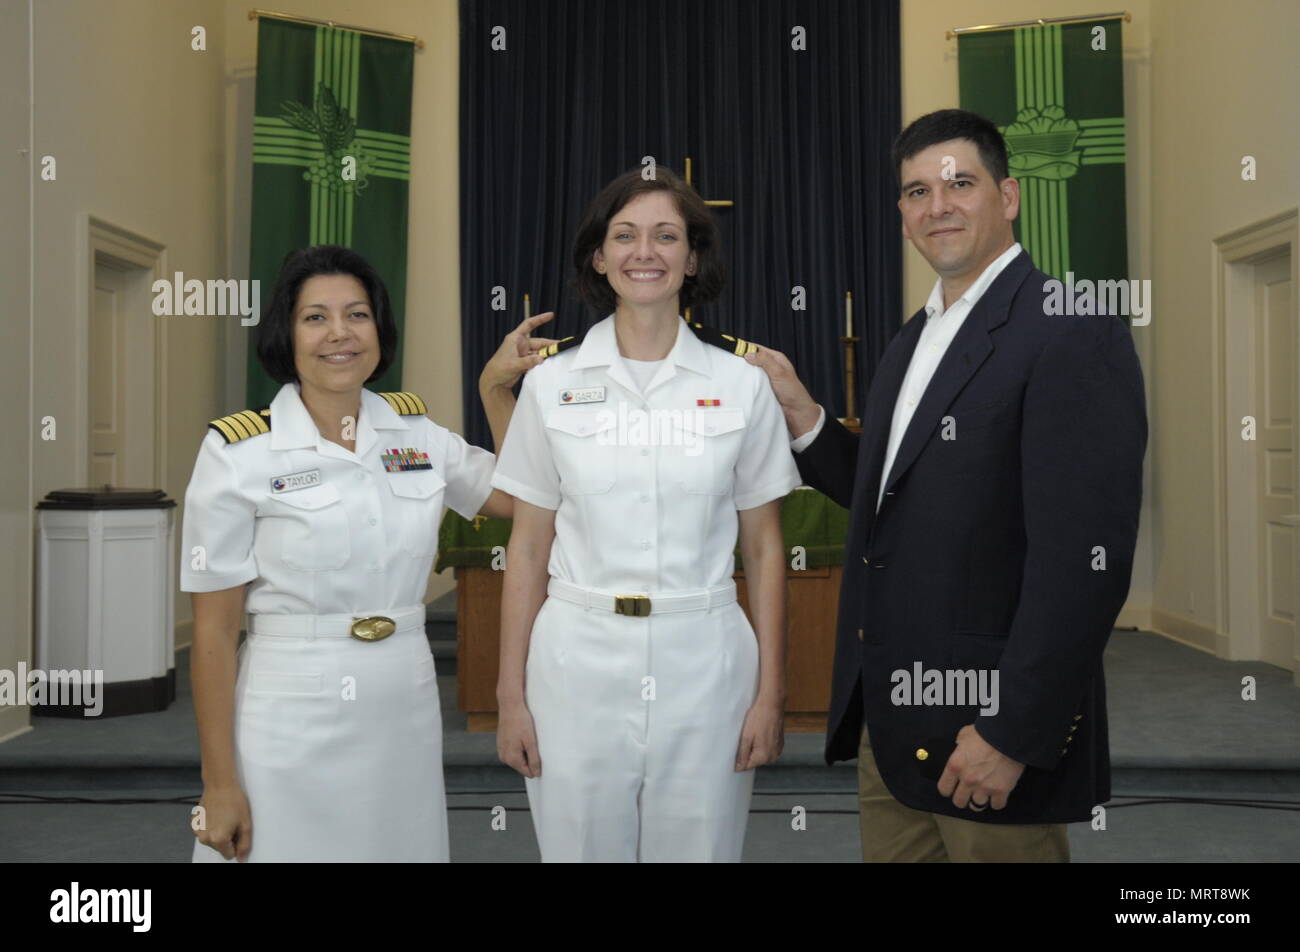 CORPUS CHRISTI, Texas (June 30, 2017) Naval Health Clinic (NHC) Corpus Christi Senior Nurse Executive (SNE), Capt. Kimberly Taylor, and Family Nurse Practitioner (FNP) Lt. Brittany Garza with her husband, Jose Garza, during her promotion ceremony at the Naval Air Station Corpus Christi Protestant Chapel June 30. (U.S. Navy photo by Bill W. Love/RELEASED) 170630-N-KF478-012 Stock Photo